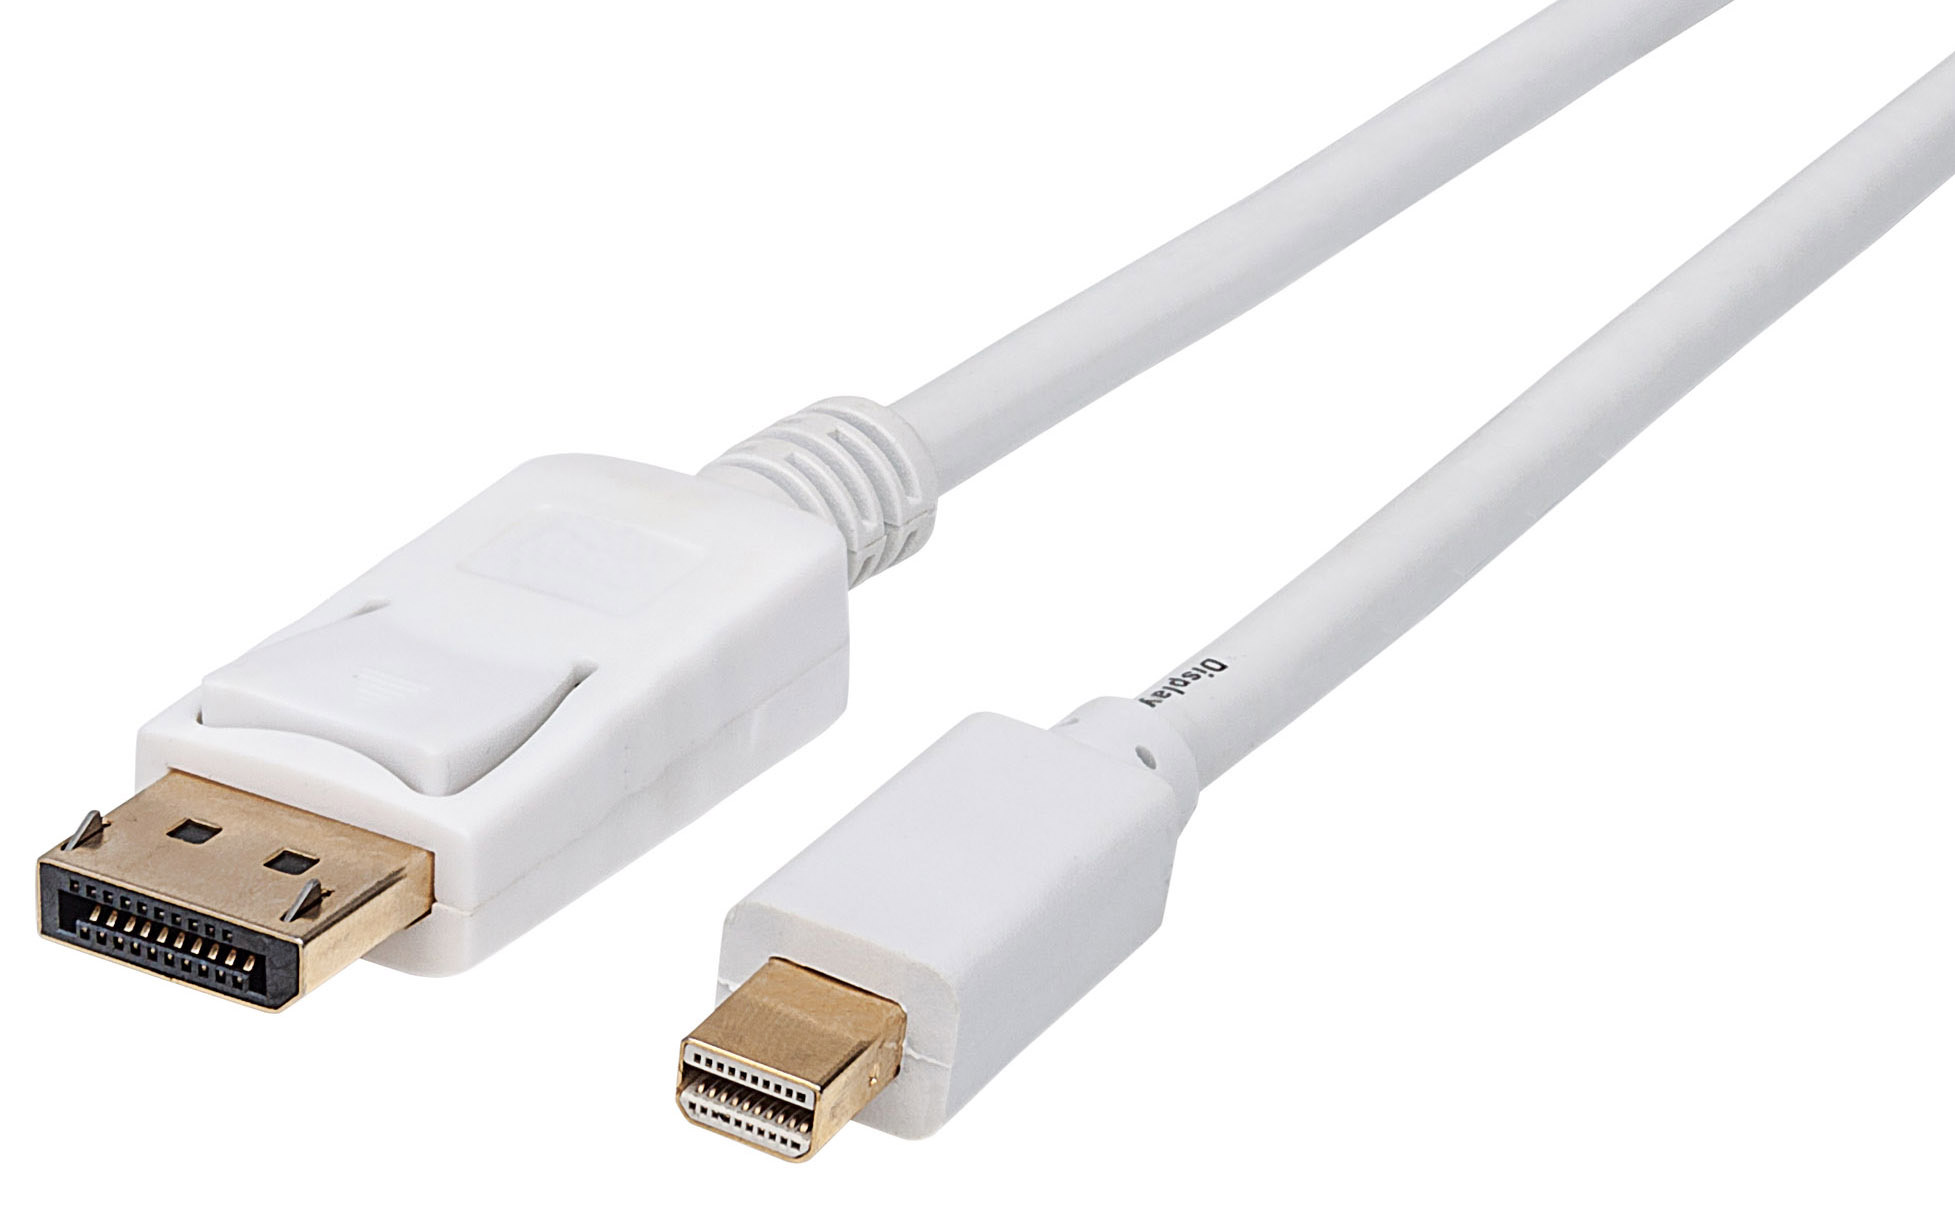 Mini DisplayPort to DisplayPort Cable Surface Pro/Dock and More iVANKY 4K@60Hz / 2K@144Hz Mini DP to DP Cable Thunderbolt to DisplayPort Cable Compatible with MacBook Air/Pro Renewed Space Grey 6.6 Feet 